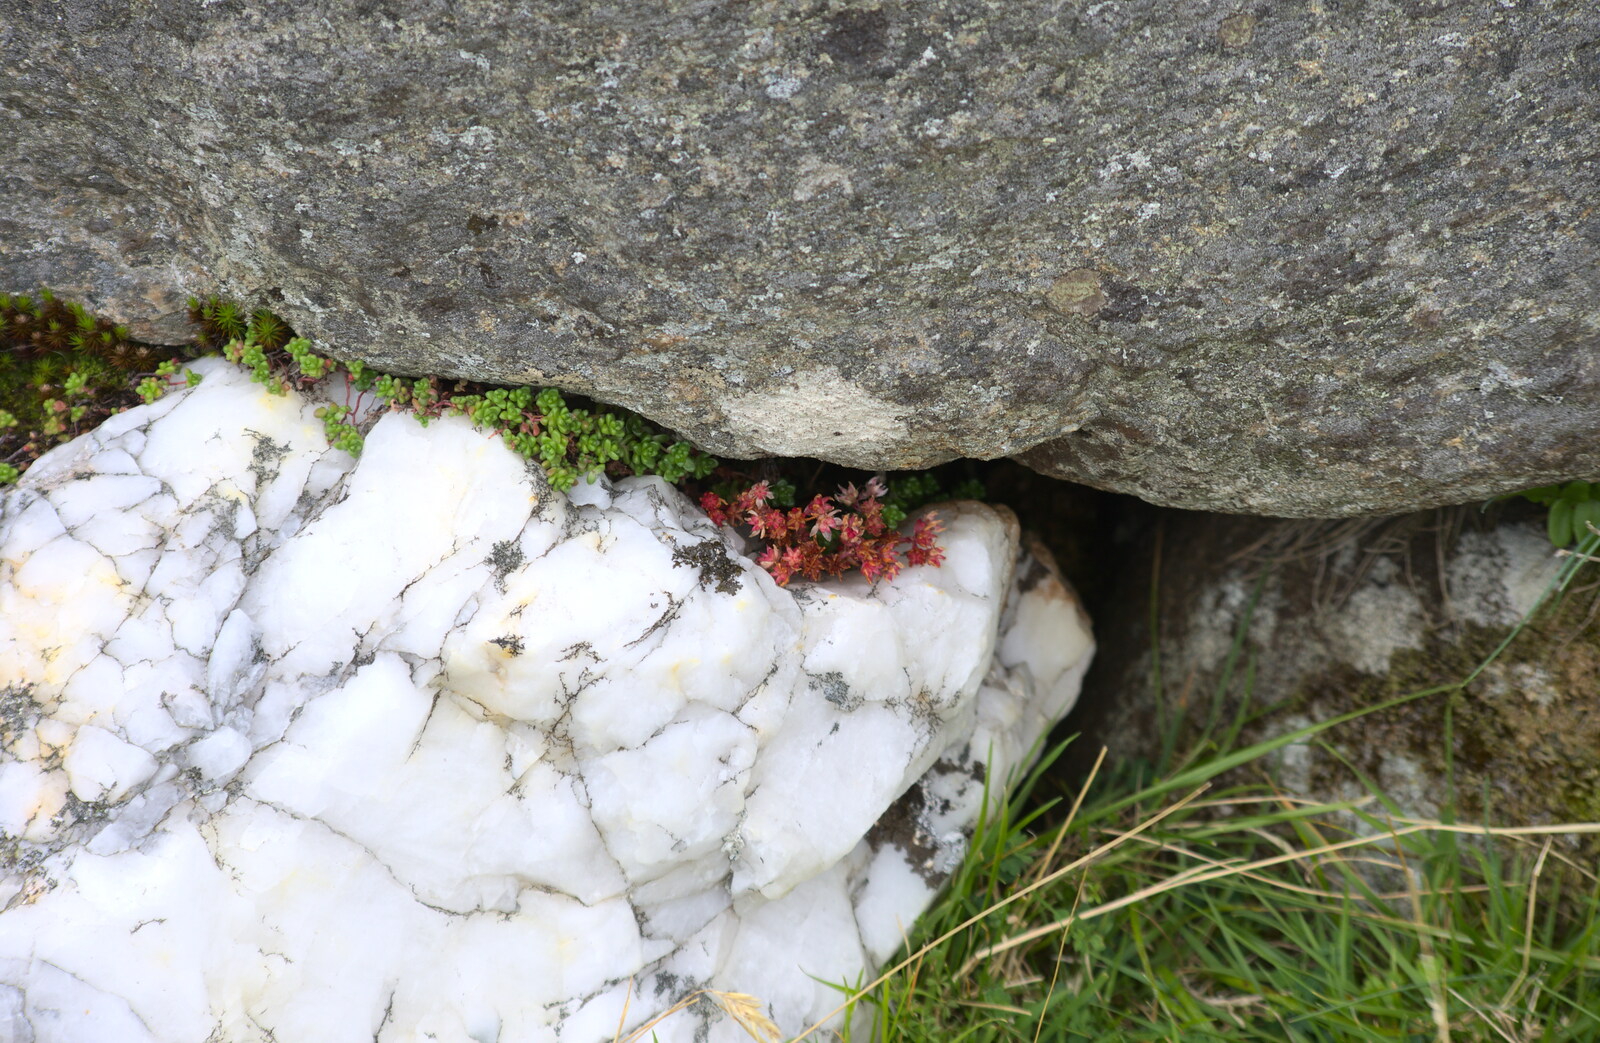 Green and red lichen on a white marble boulder from Surfing Achill Island, Oileán Acla, Maigh Eo, Ireland - 8th August 2017